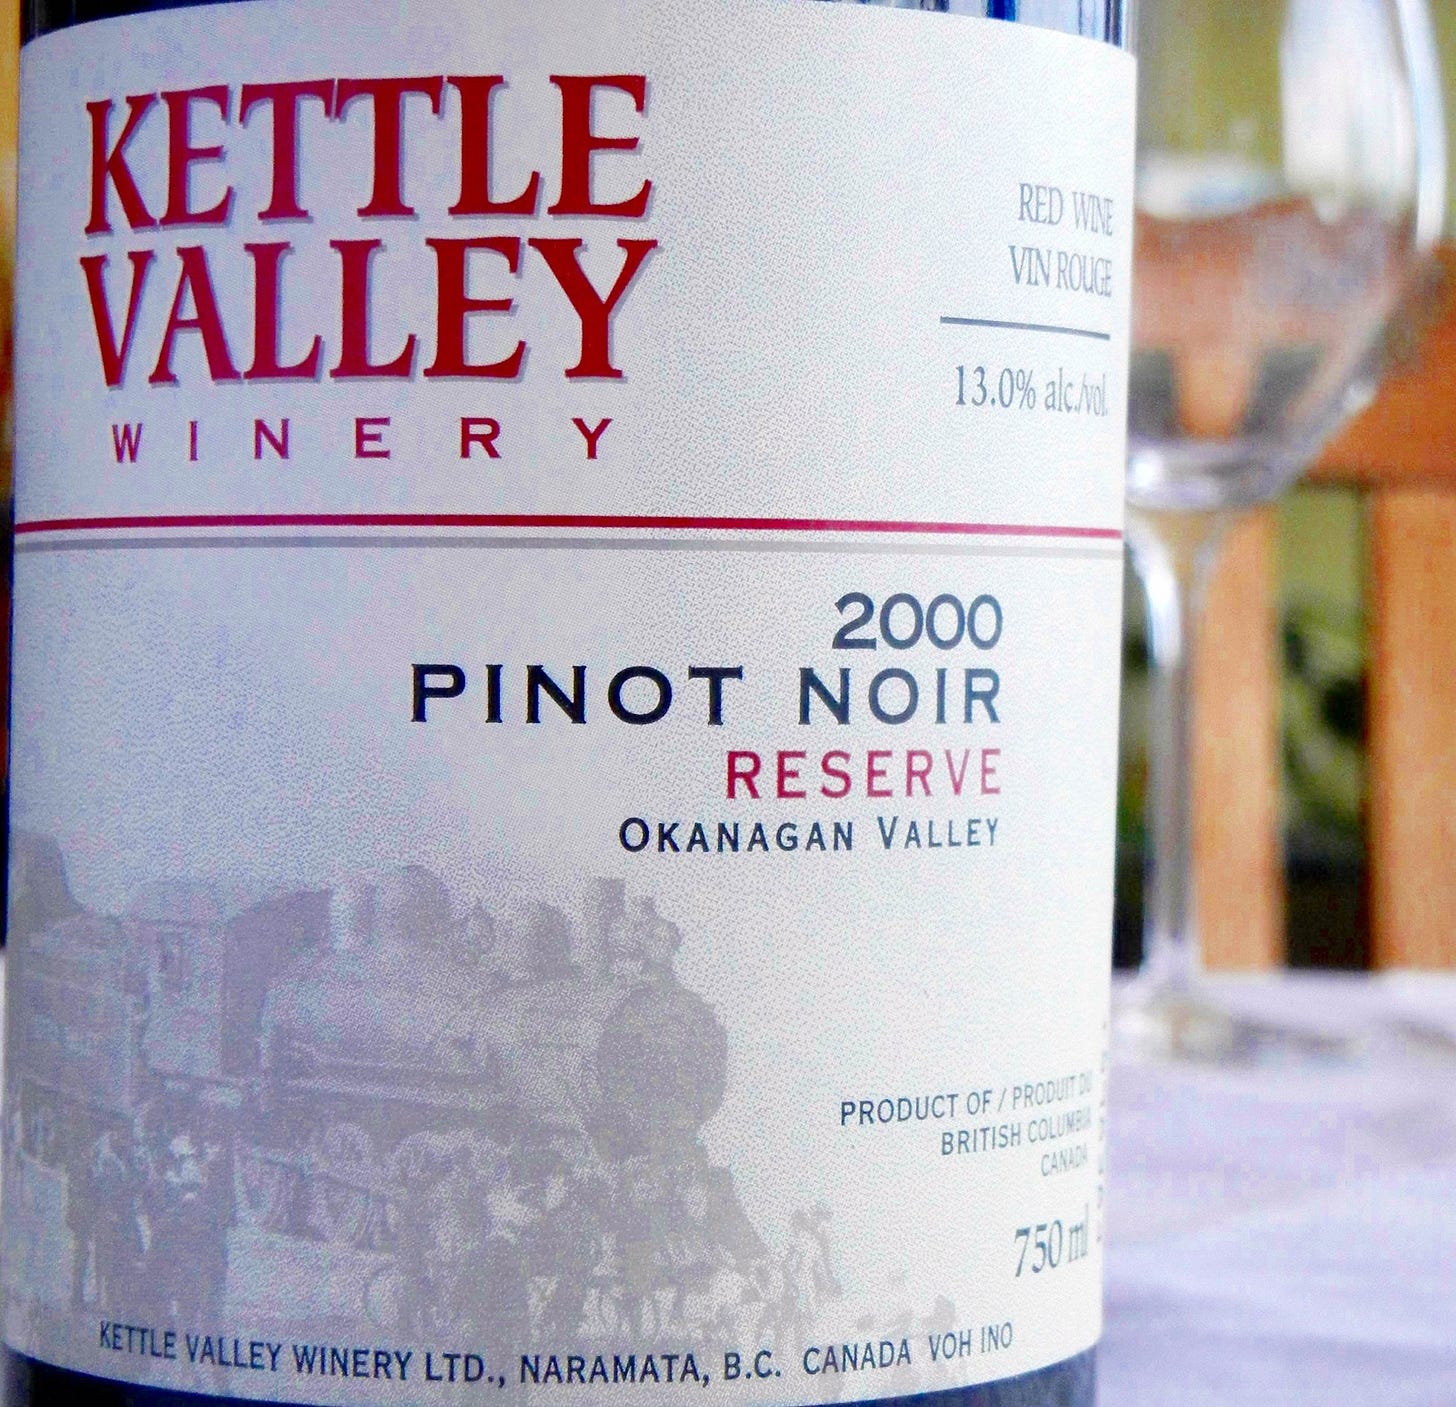 Kettle Valley Reserve Pinot Noir 2000 Label - BC Pinot Noir Tasting Review 25 